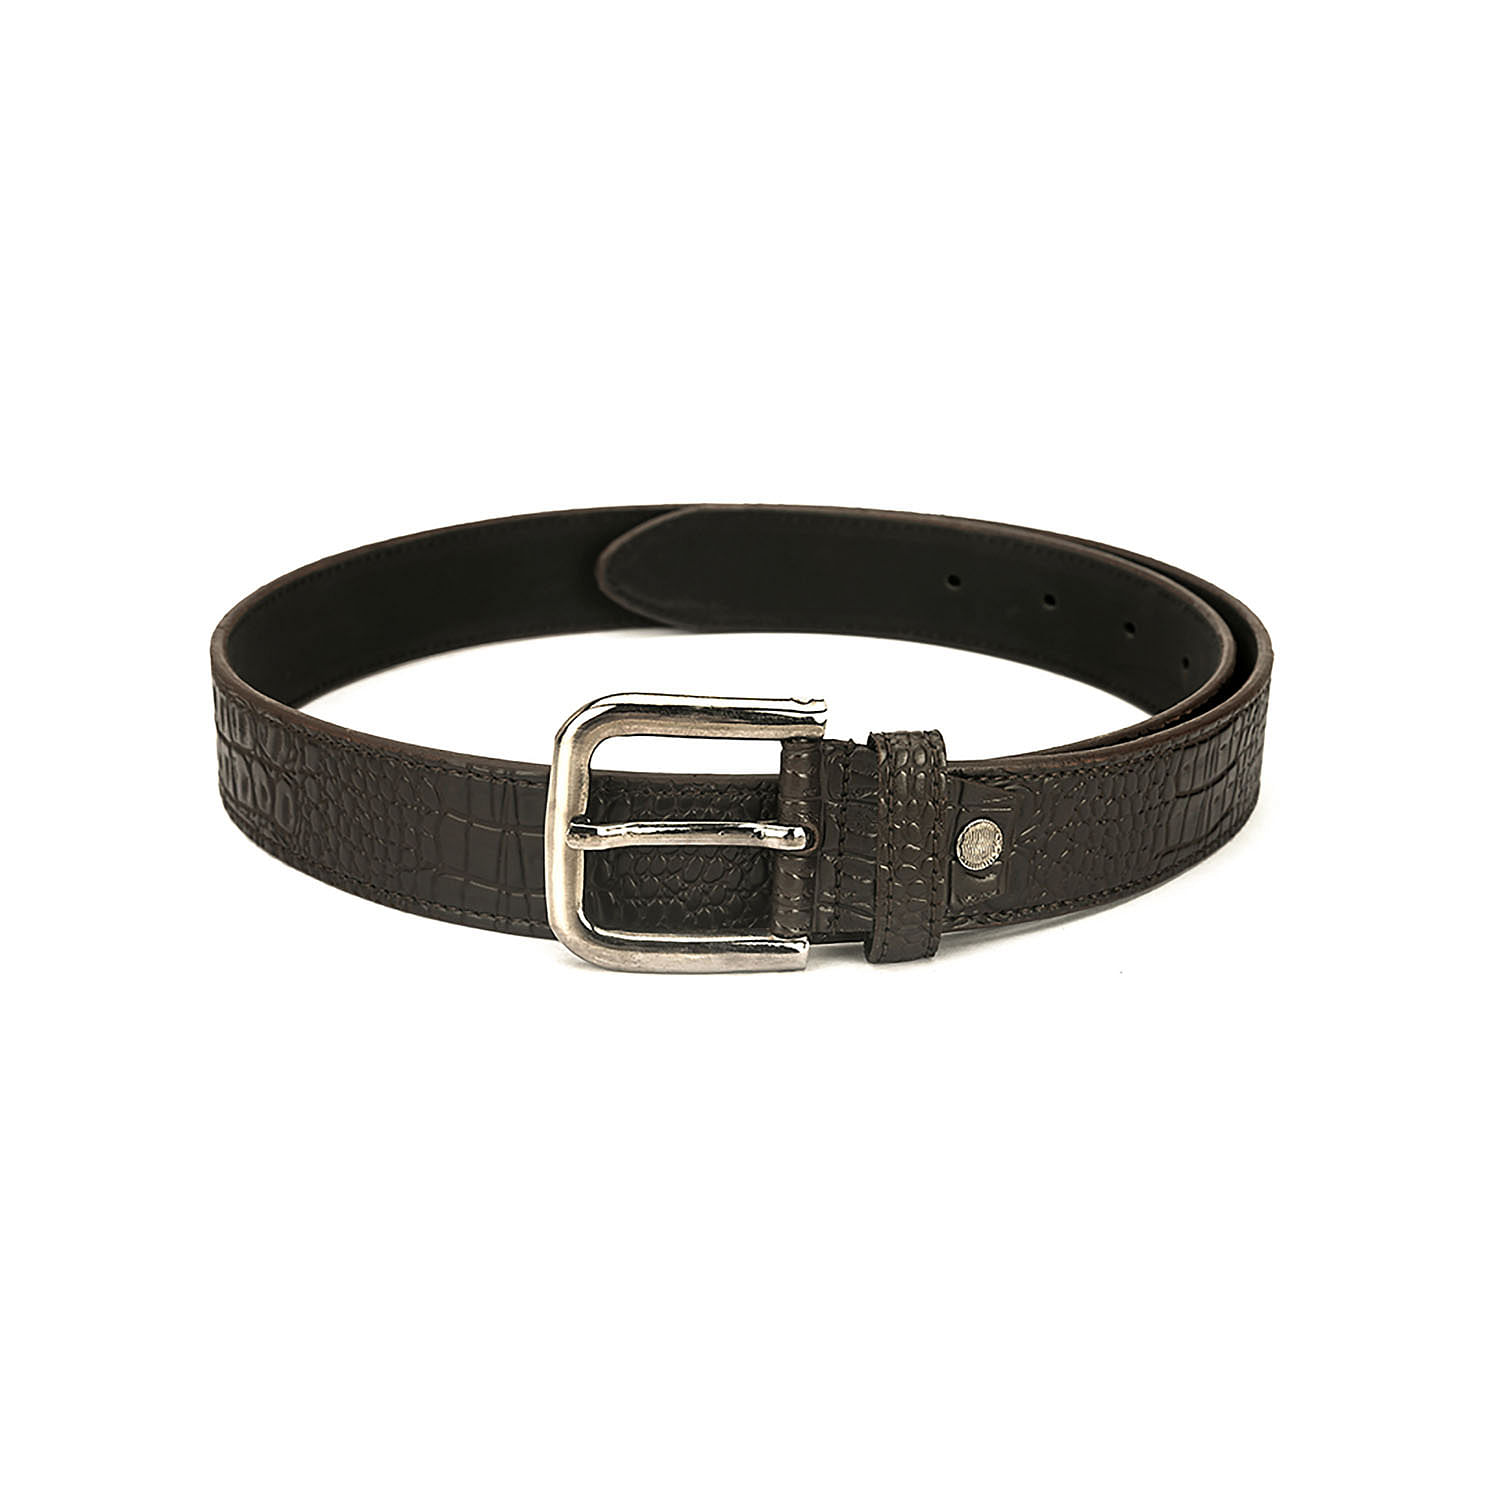 Men's Casual Textured Perforated Belt - BRN - LZ- CB-101